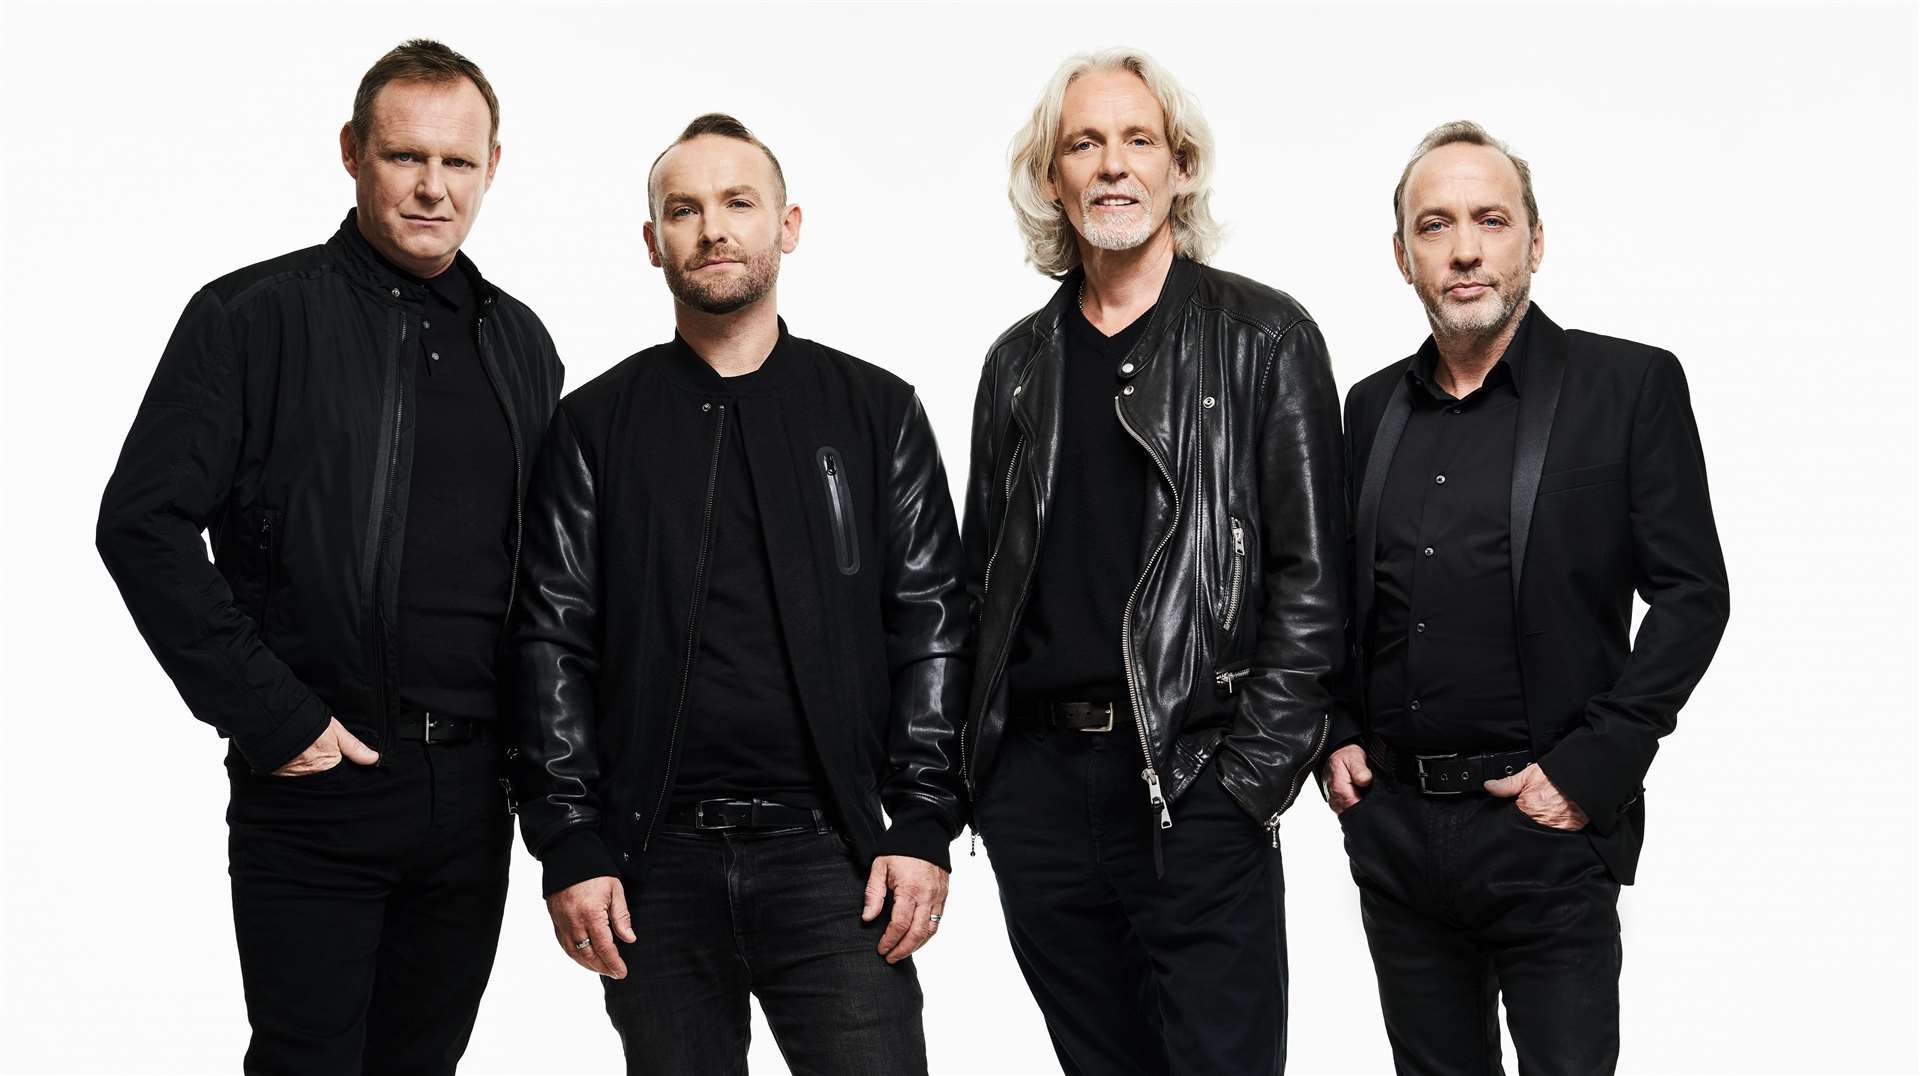 Wet Wet Wet with new singer Kevin Sim are ready to rock next year